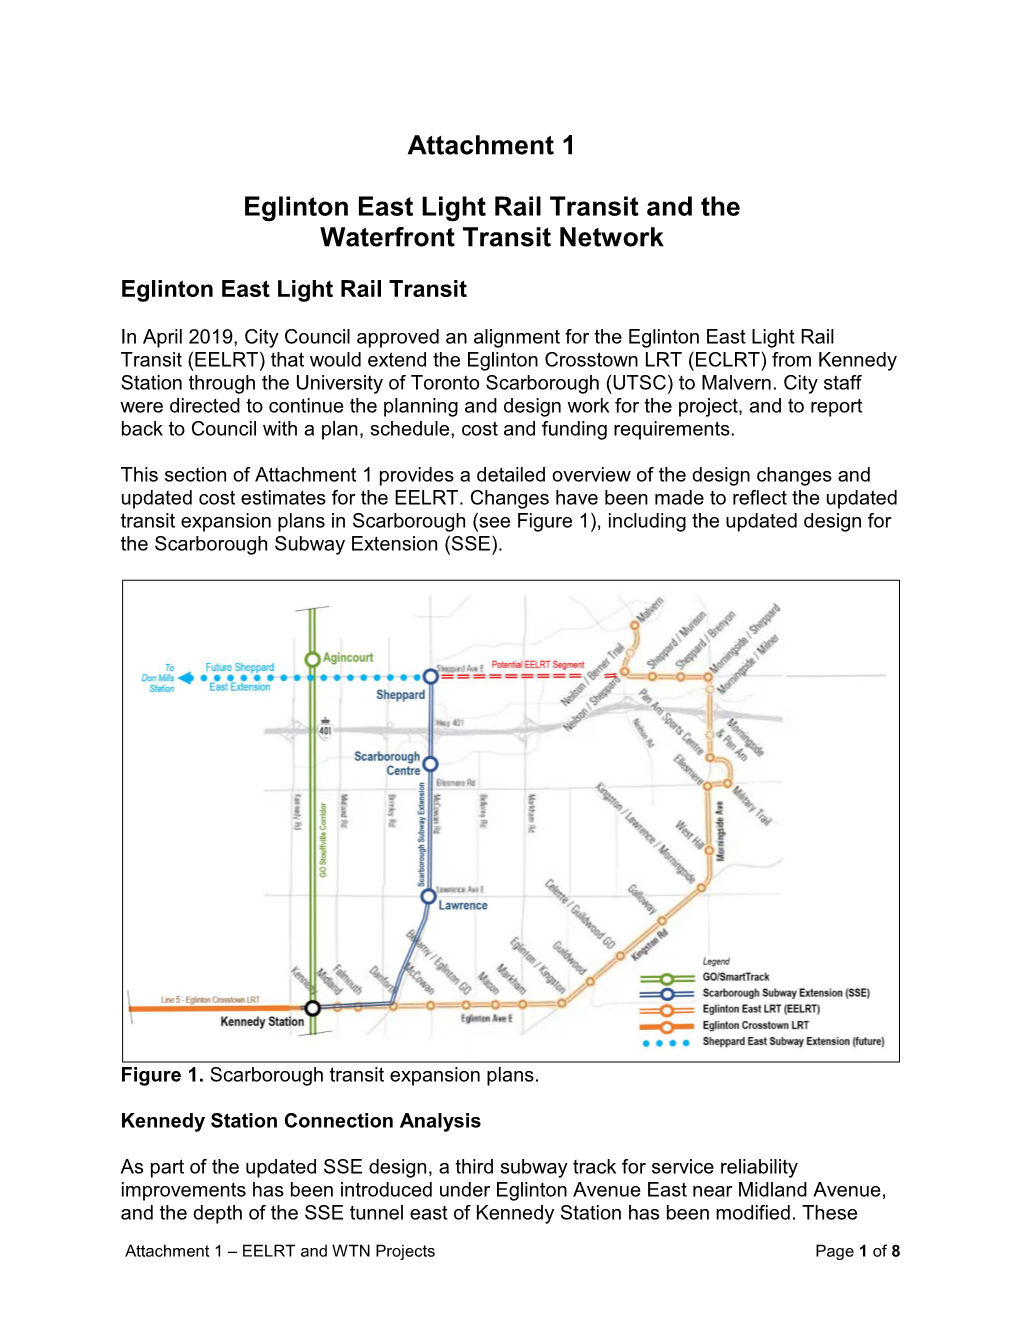 Eglinton East Light Rail Transit and the Waterfront Transit Network